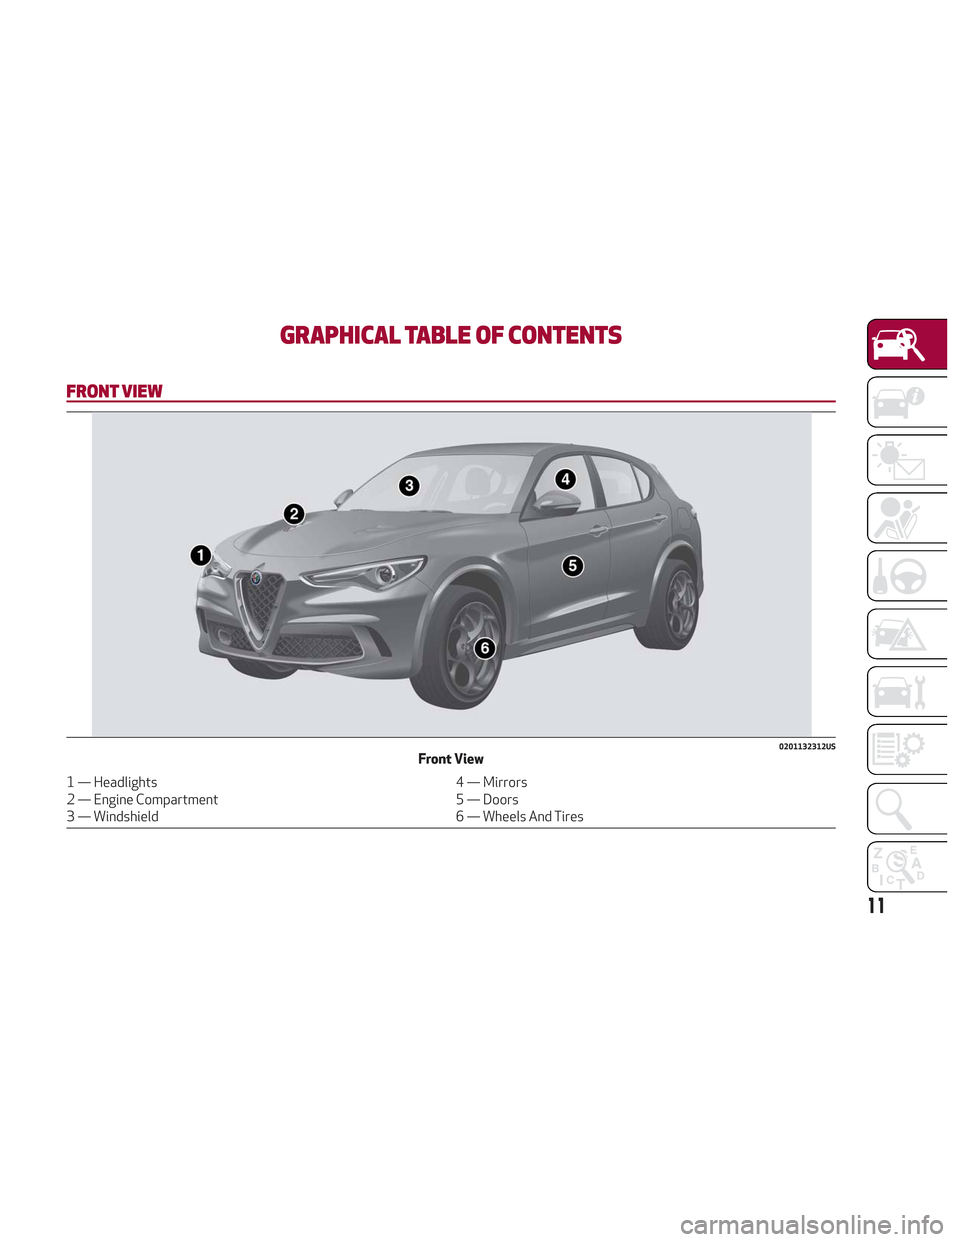 Alfa Romeo Stelvio 2018 User Guide GRAPHICAL TABLE OF CONTENTS
FRONT VIEW
0201132312USFront View
1 — Headlights4 — Mirrors
2 — Engine Compartment 5 — Doors
3 — Windshield 6 — Wheels And Tires
11 